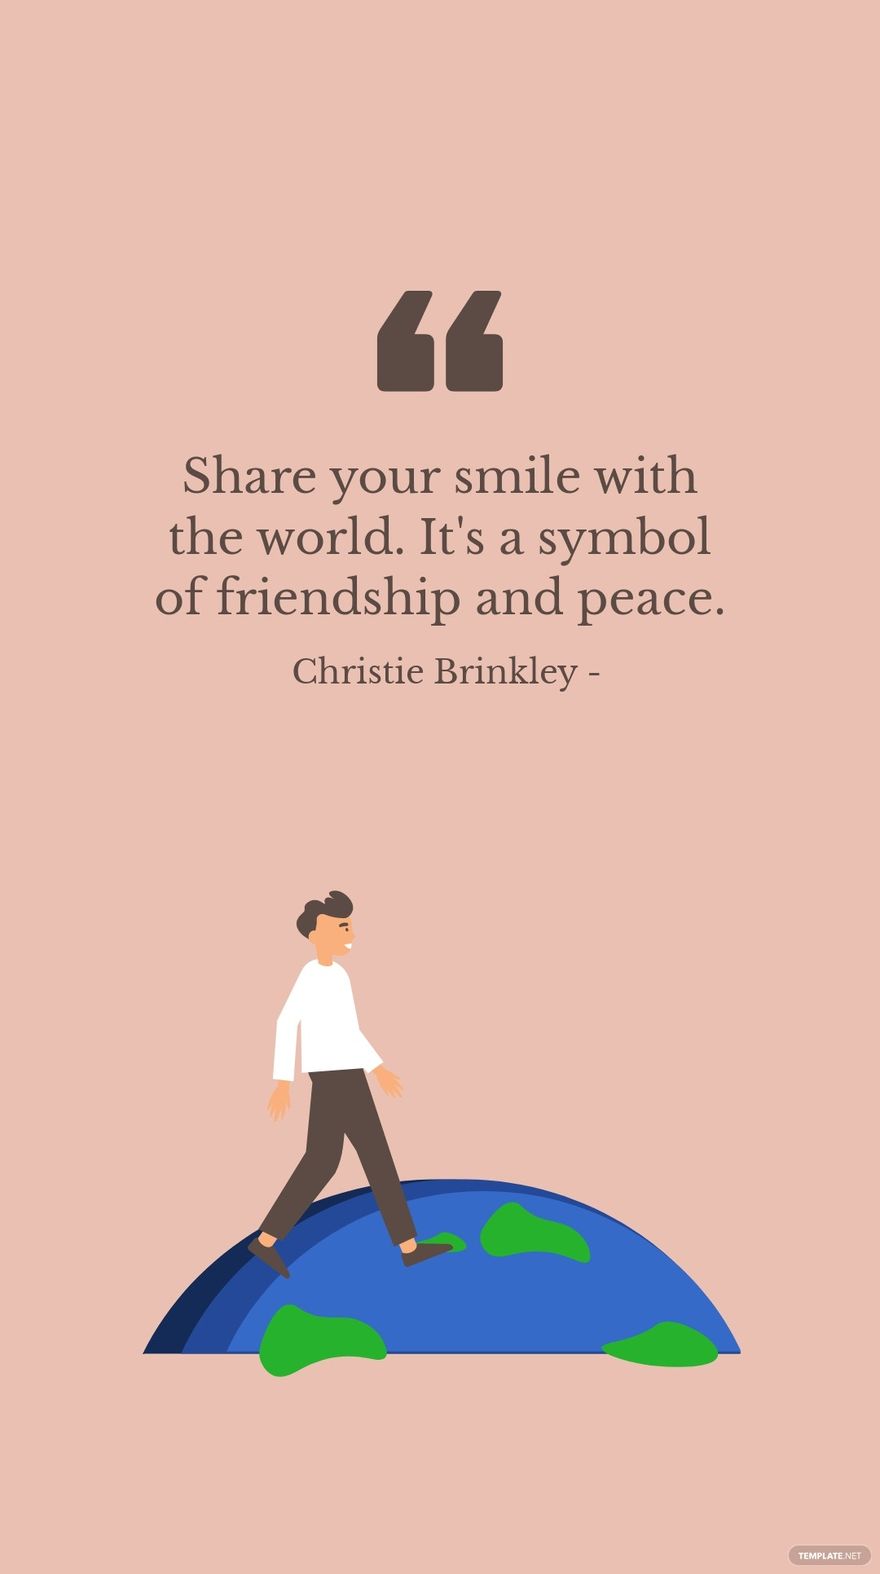 Free Christie Brinkley - Share your smile with the world. It's a symbol of friendship and peace. in JPG